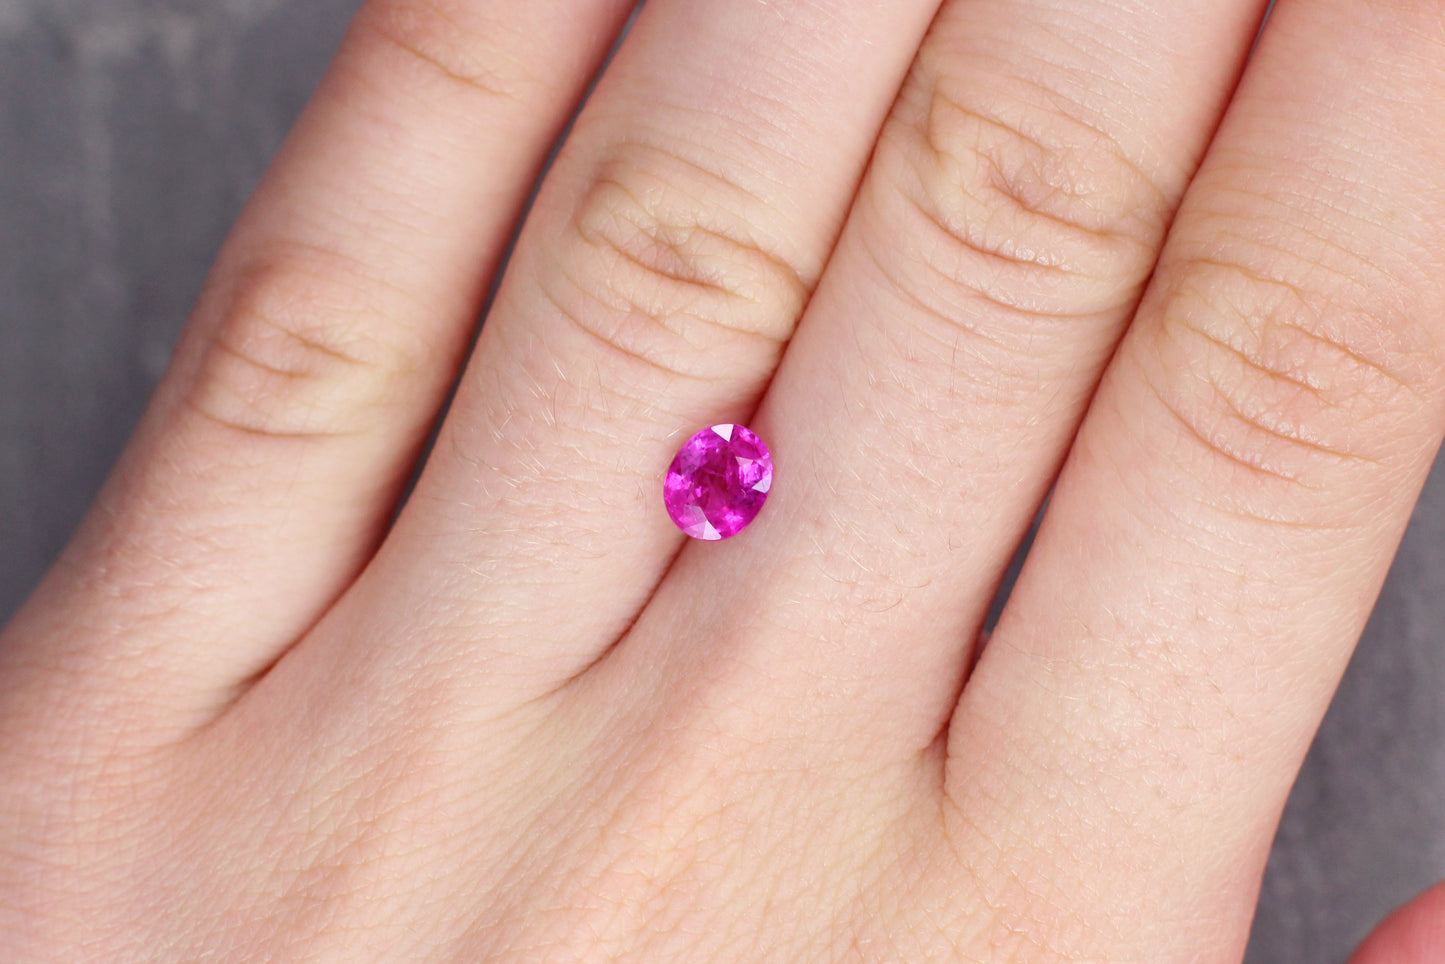 1.18ct Pink, Oval Sapphire, H(a), Myanmar - 6.67 x 5.53 x 3.55mm